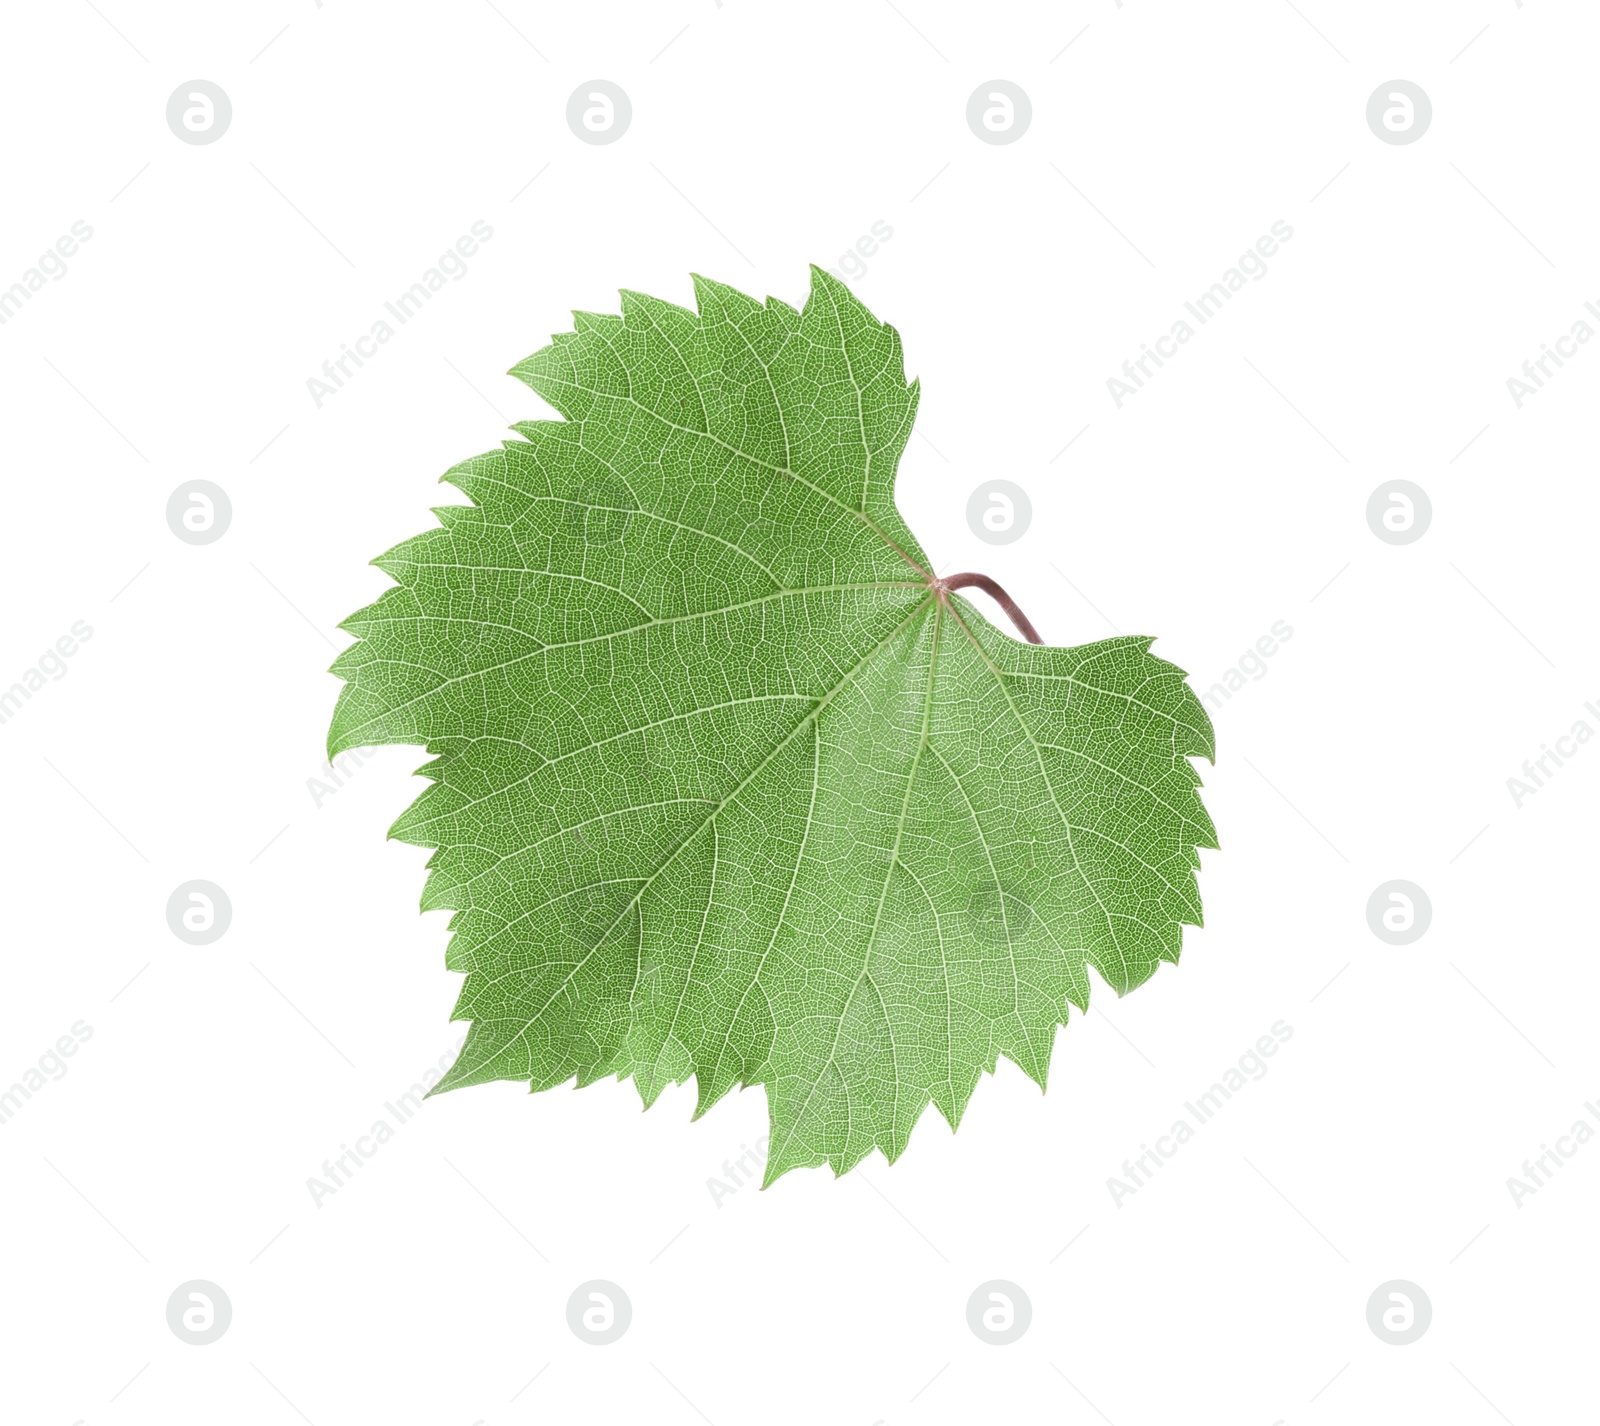 Photo of One green grape leaf isolated on white